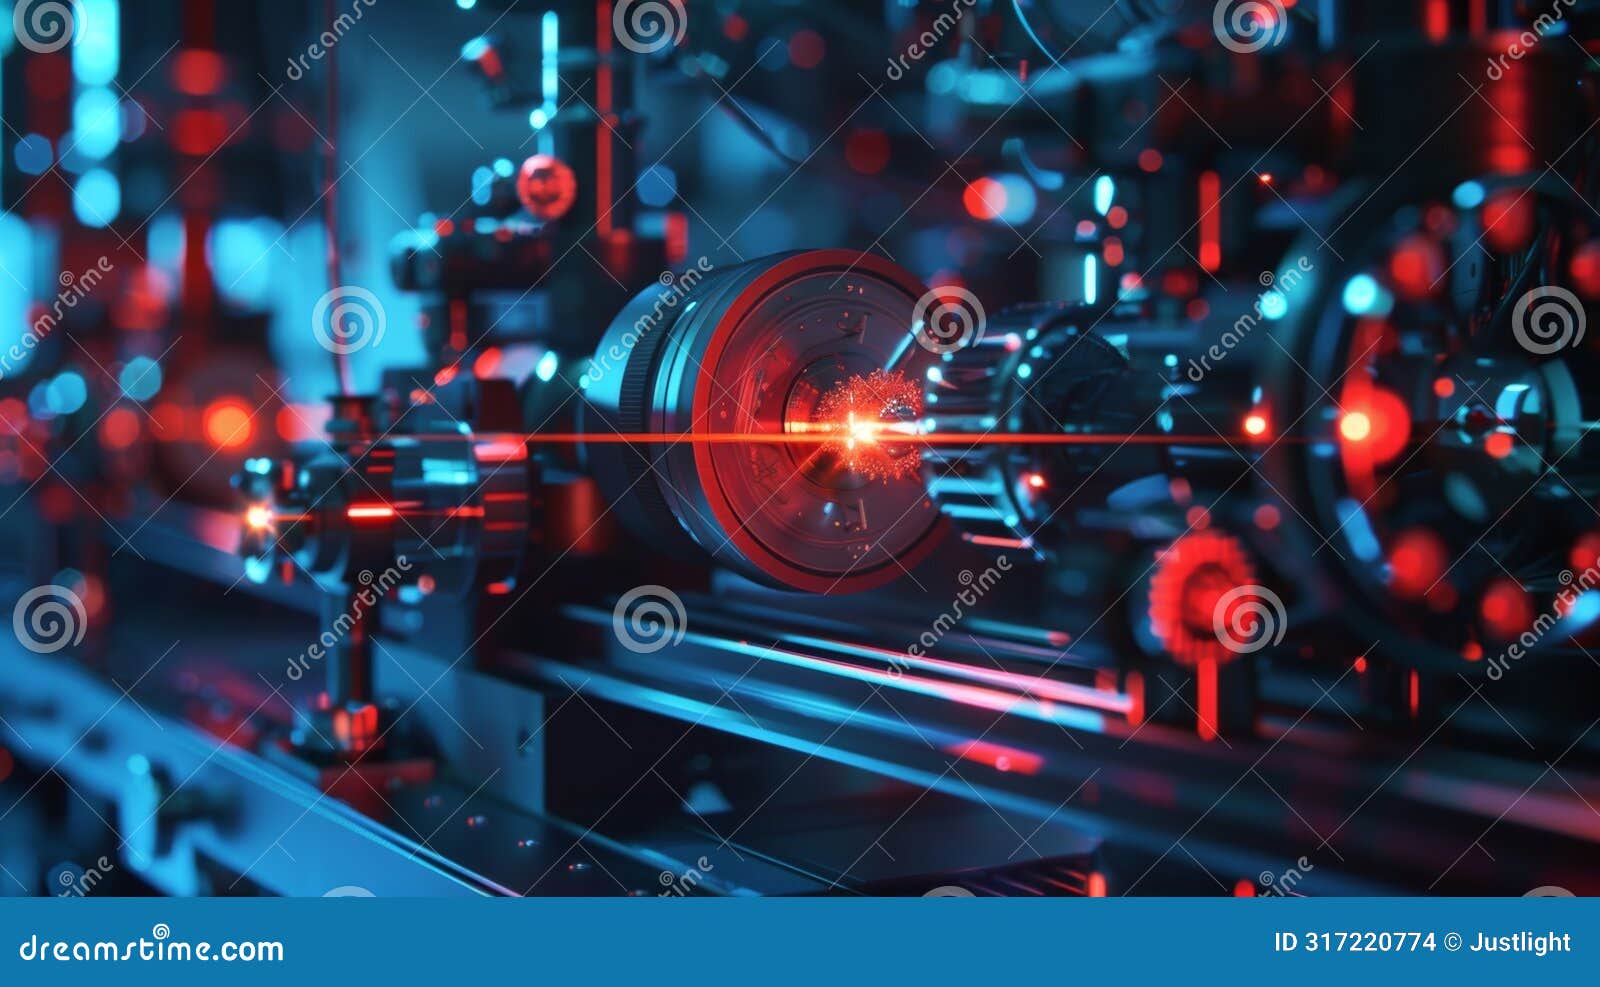 scientists carefully adjusting lasers and precise equipment to control the quantum particles and achieve desired results